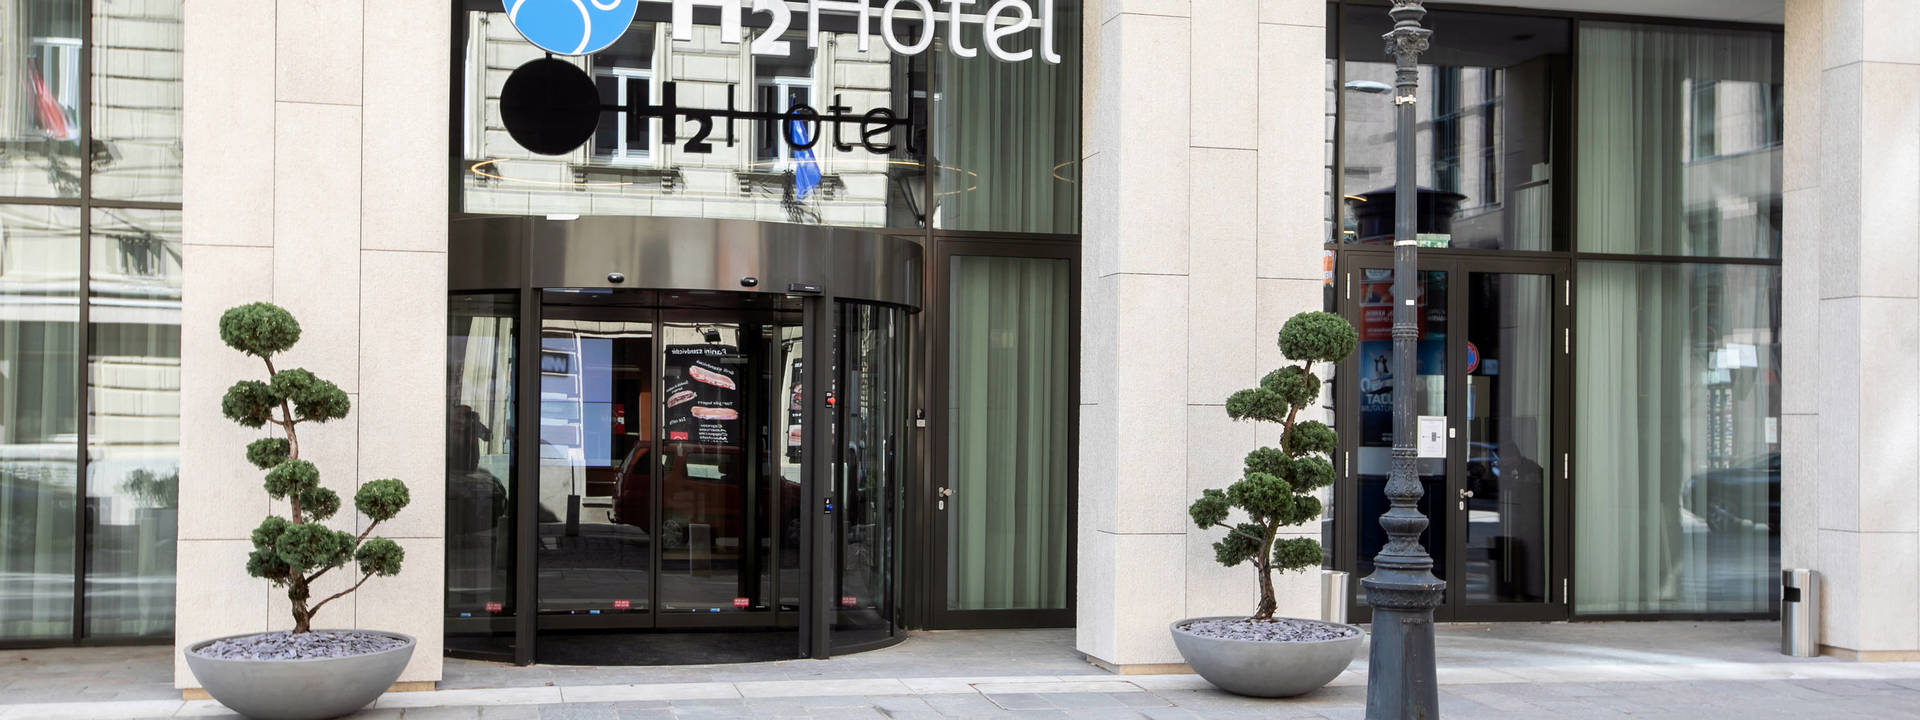 H2 Hotels goes Budapest